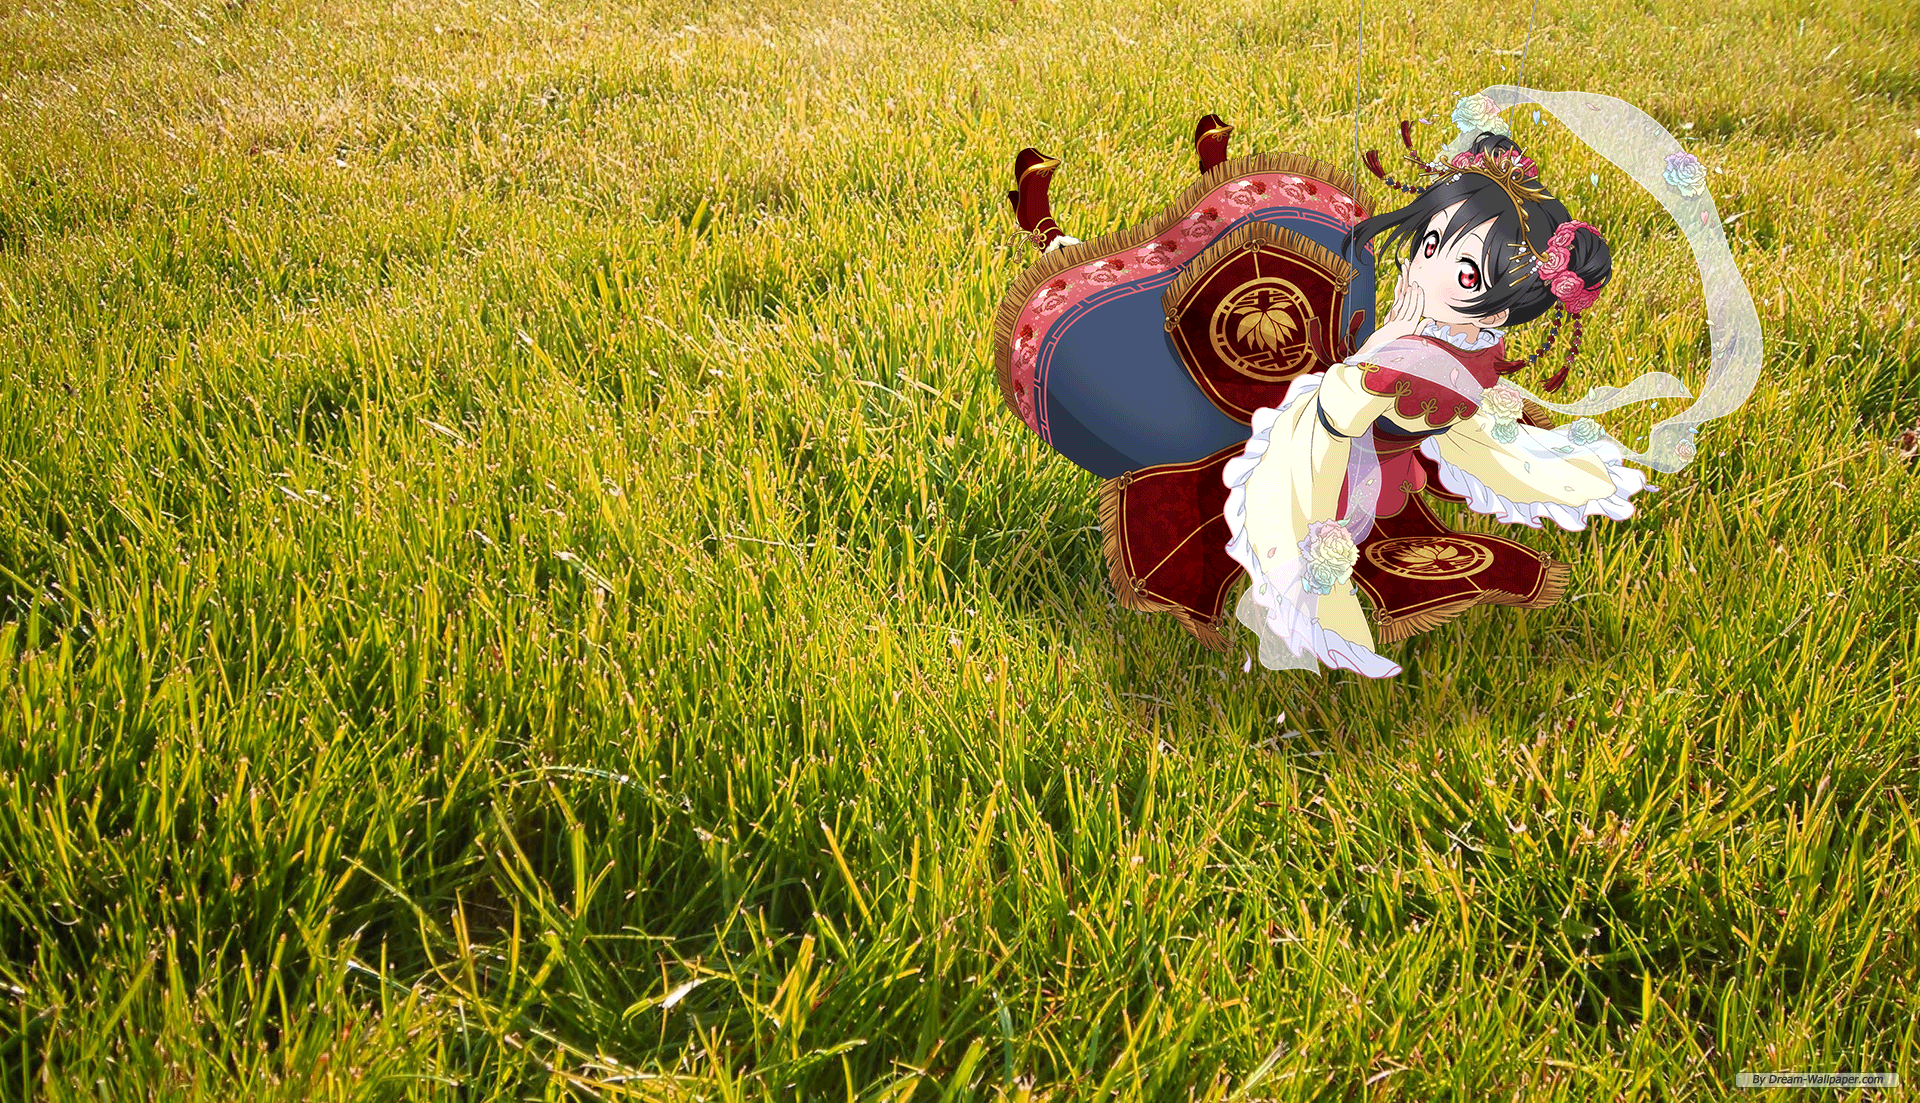 Anime 1920x1103 Love Live! anime girls anime grass picture-in-picture black hair fantasy girl dress red eyes